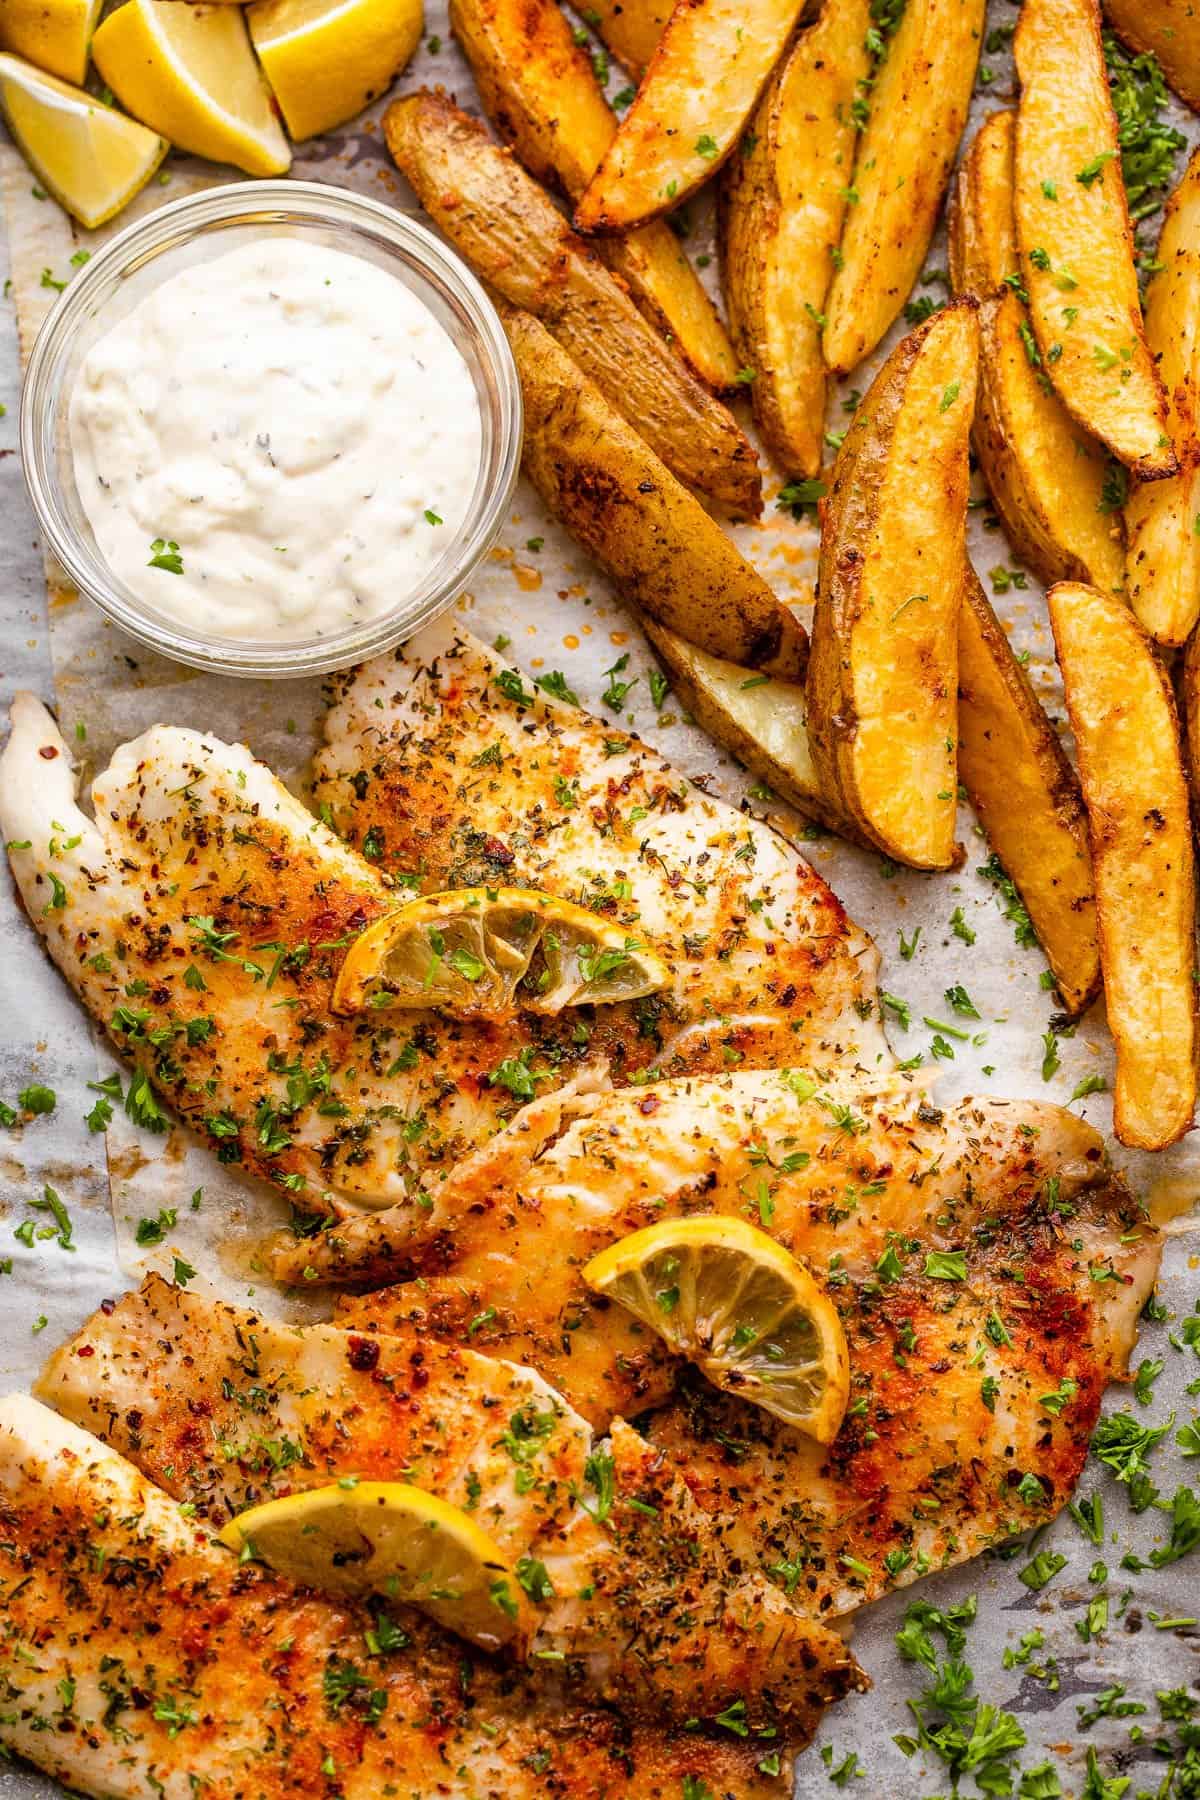 Tilapia fish fillets served with potato wedges and tartar sauce.